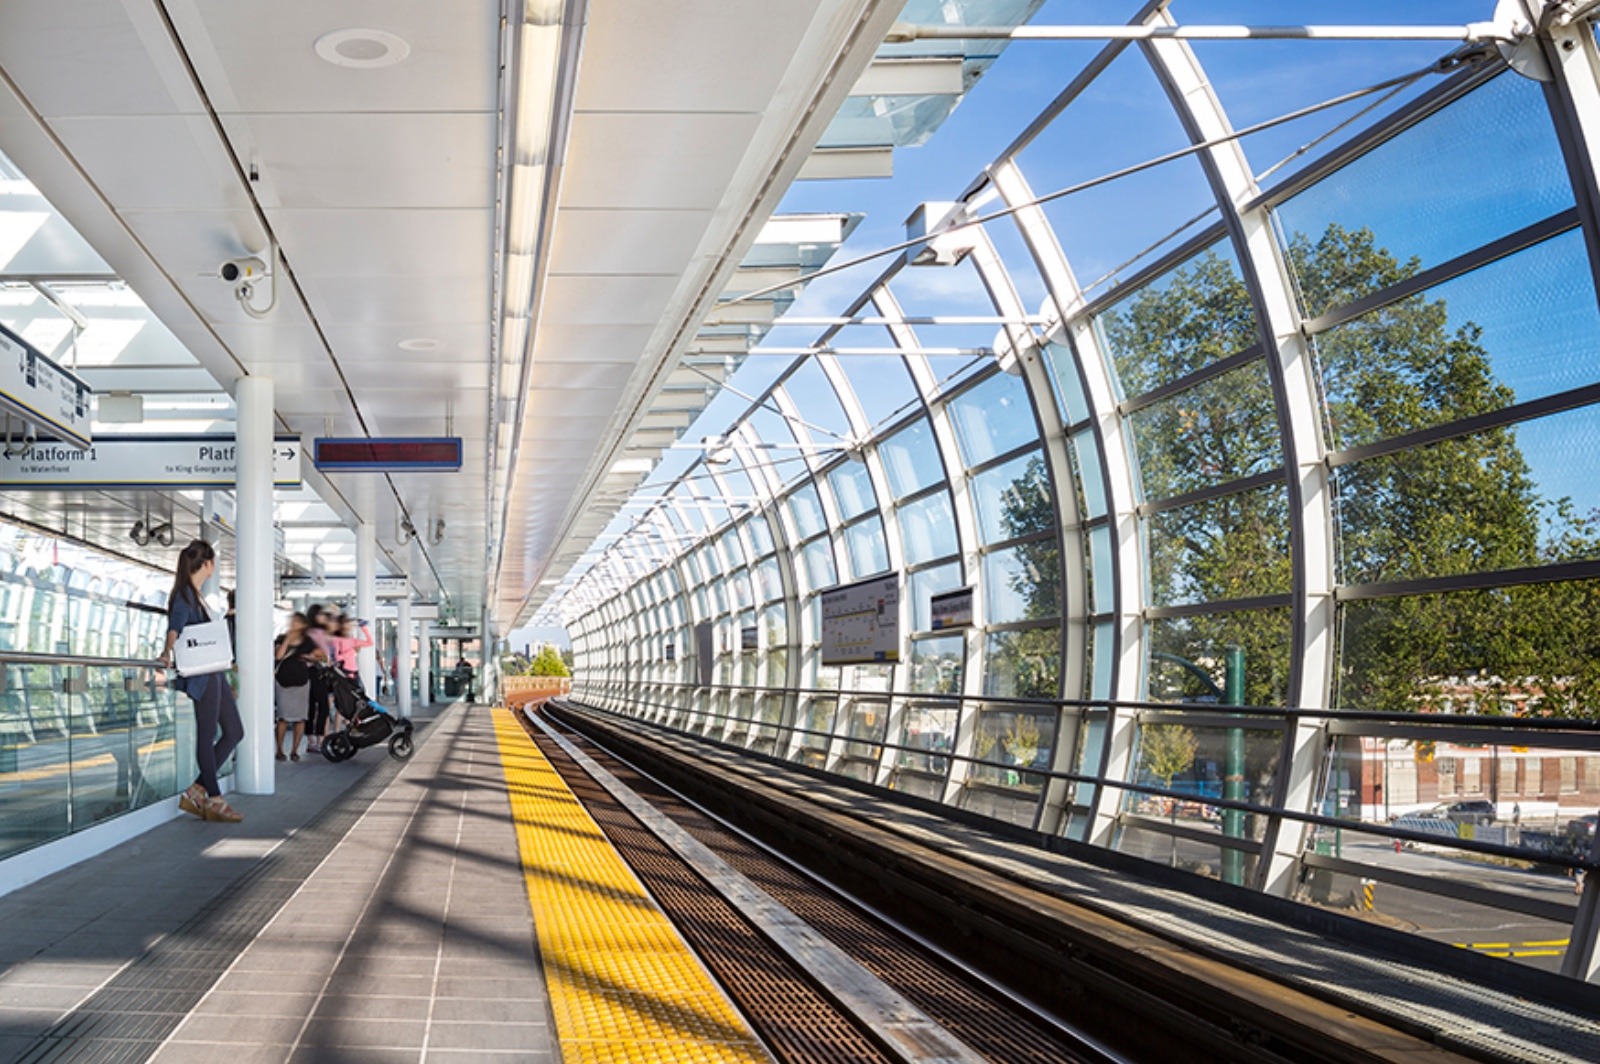 Robertson Walls & Ceilings Completed Projects
Infrastructure: Main Street SkyTrain Station
Completed 2015